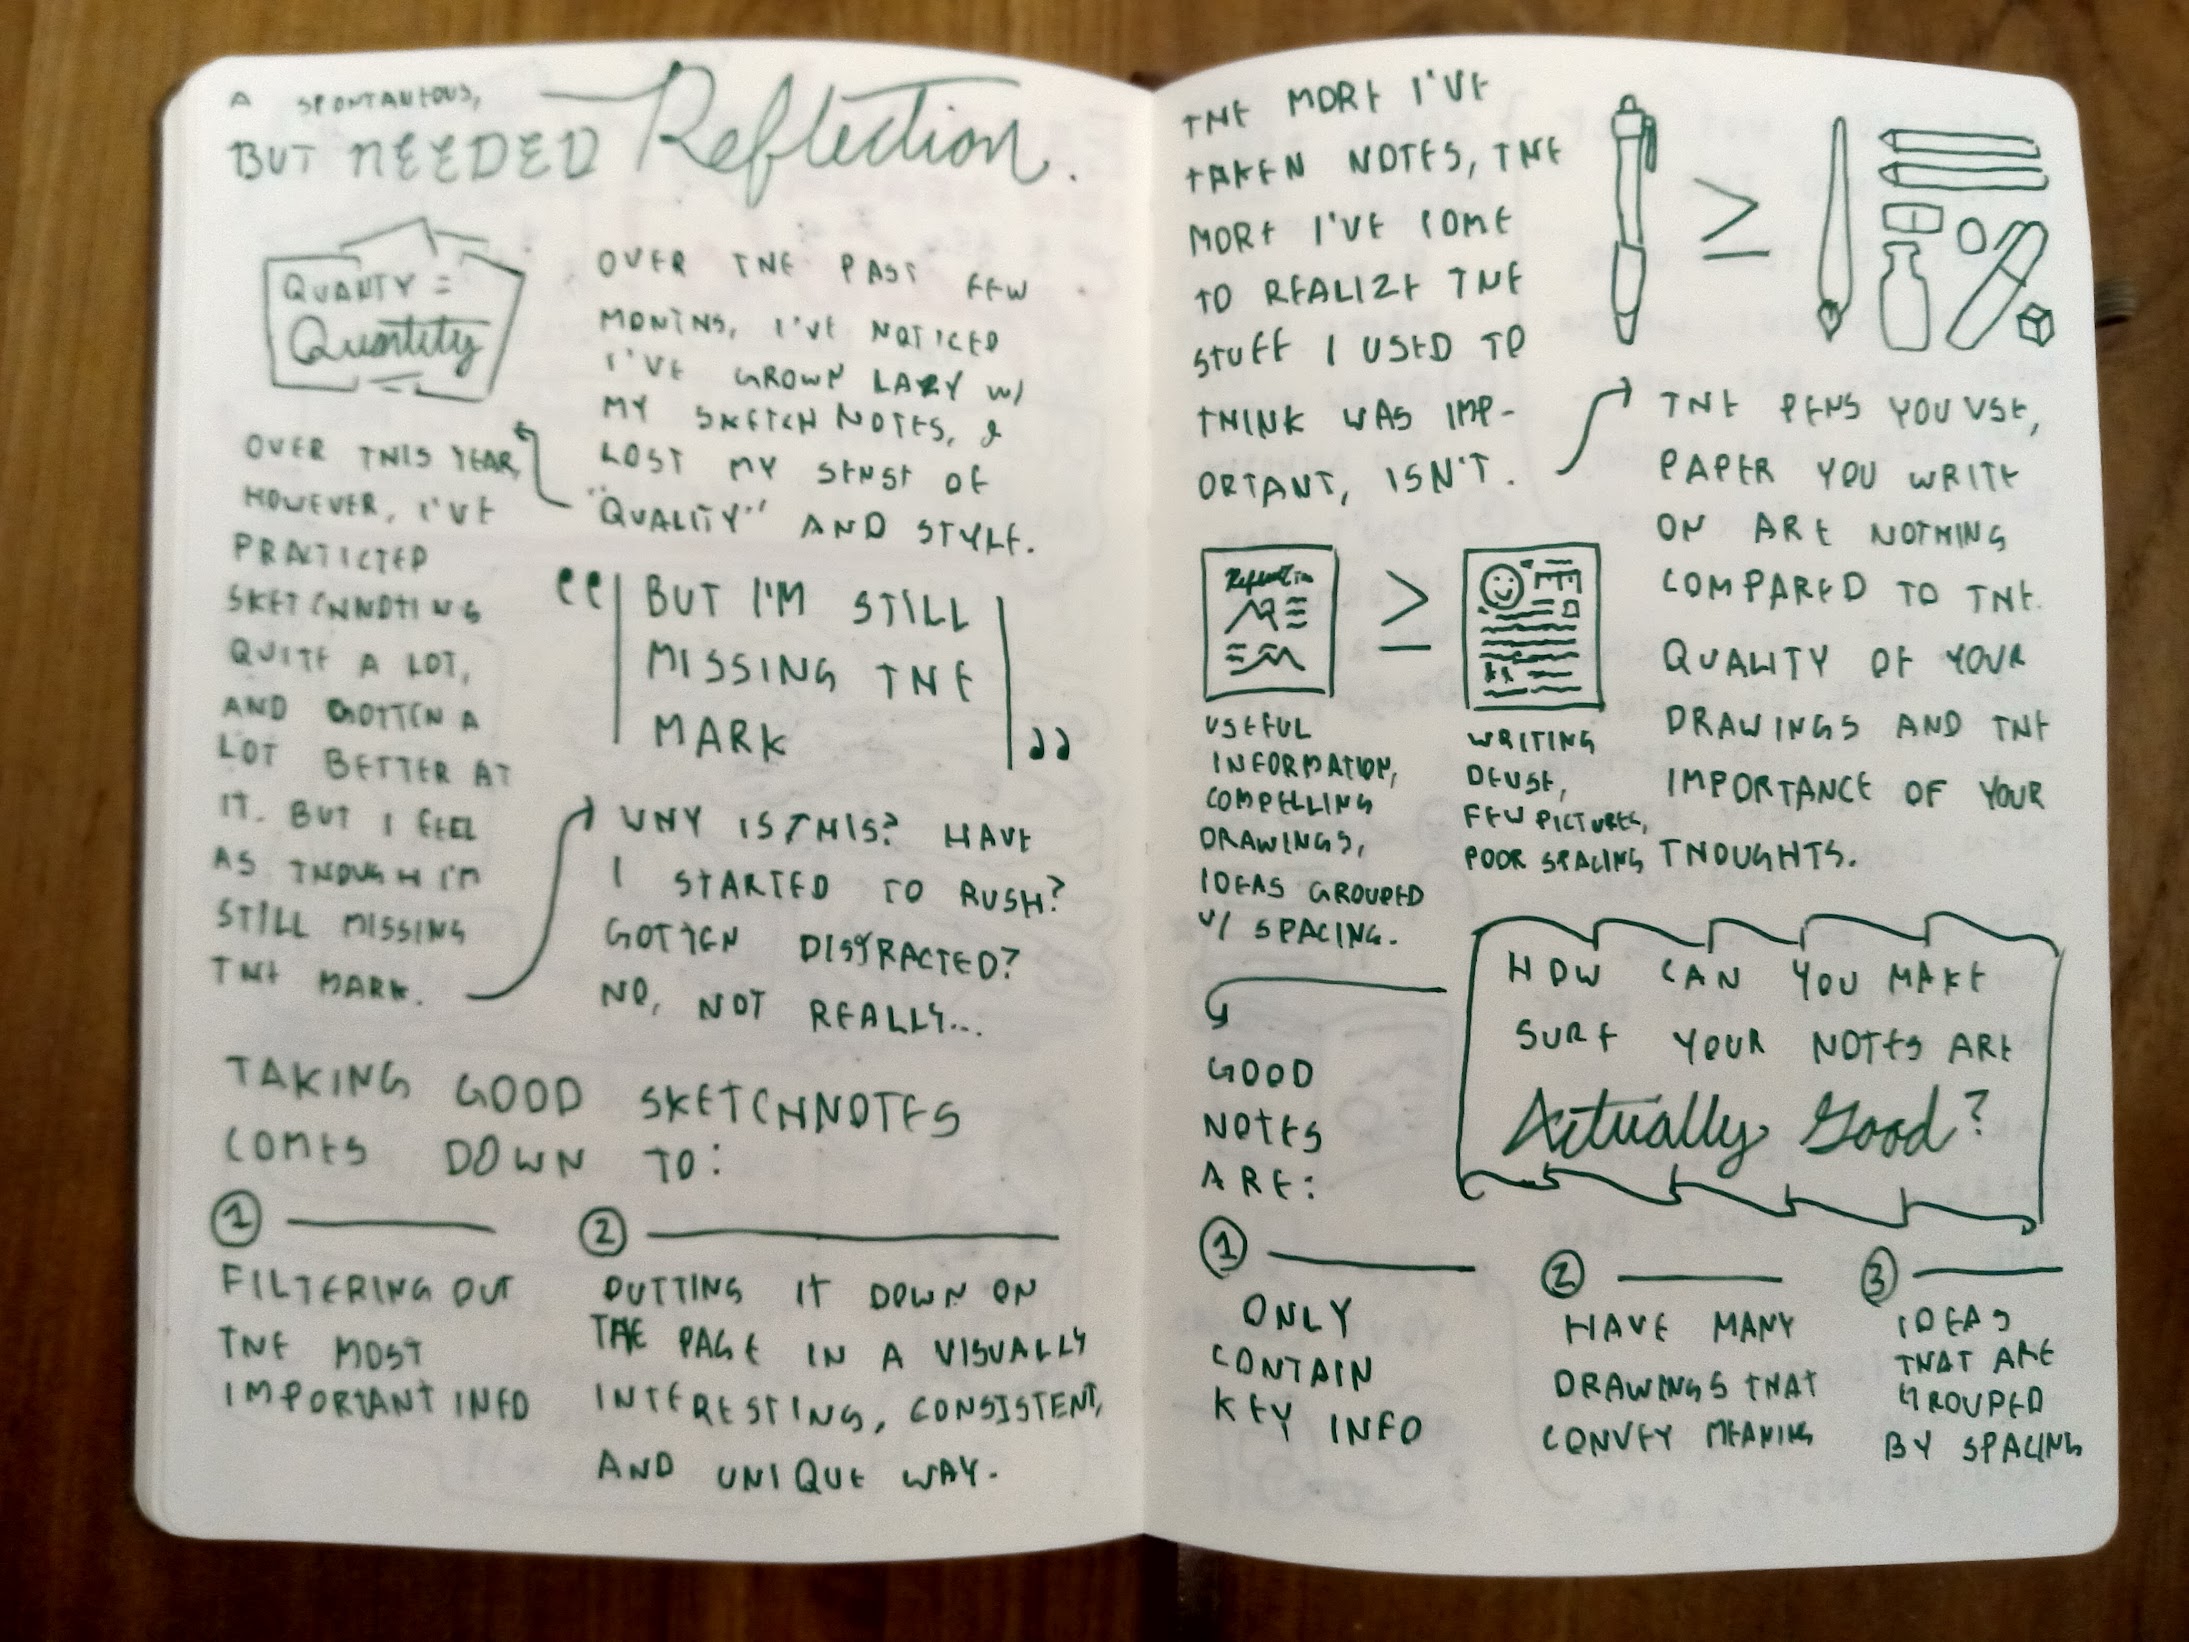 The first spread of sketchnotes from which this article was transcribed.